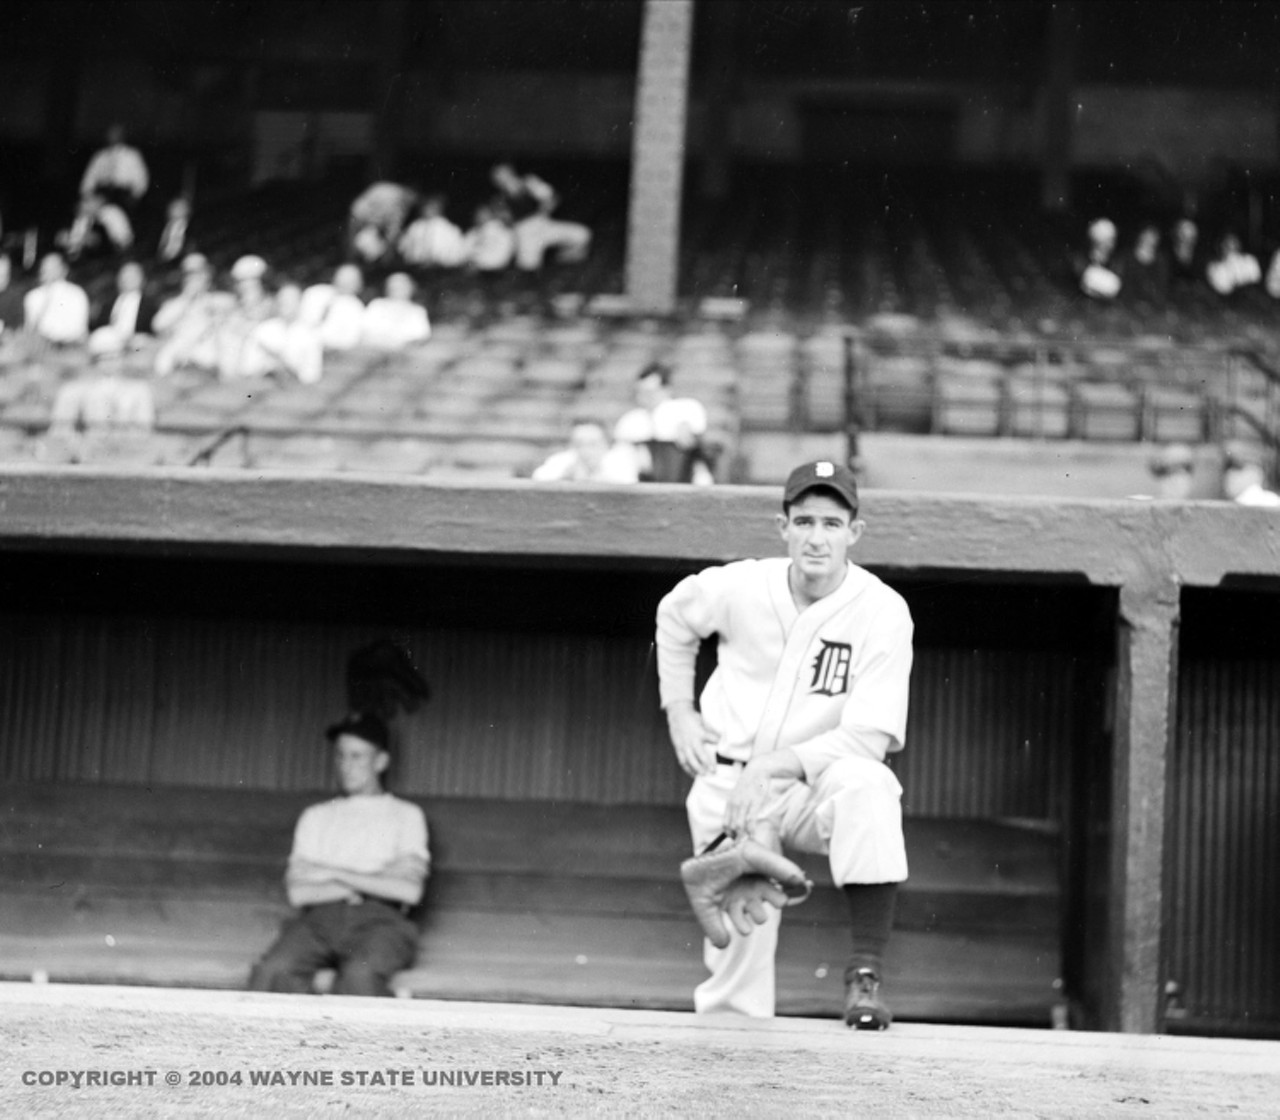 Pitcher Elden Auker, who struck out Babe Ruth in his first appearance on the mound for the Tigers, in the Navin Field dugout.